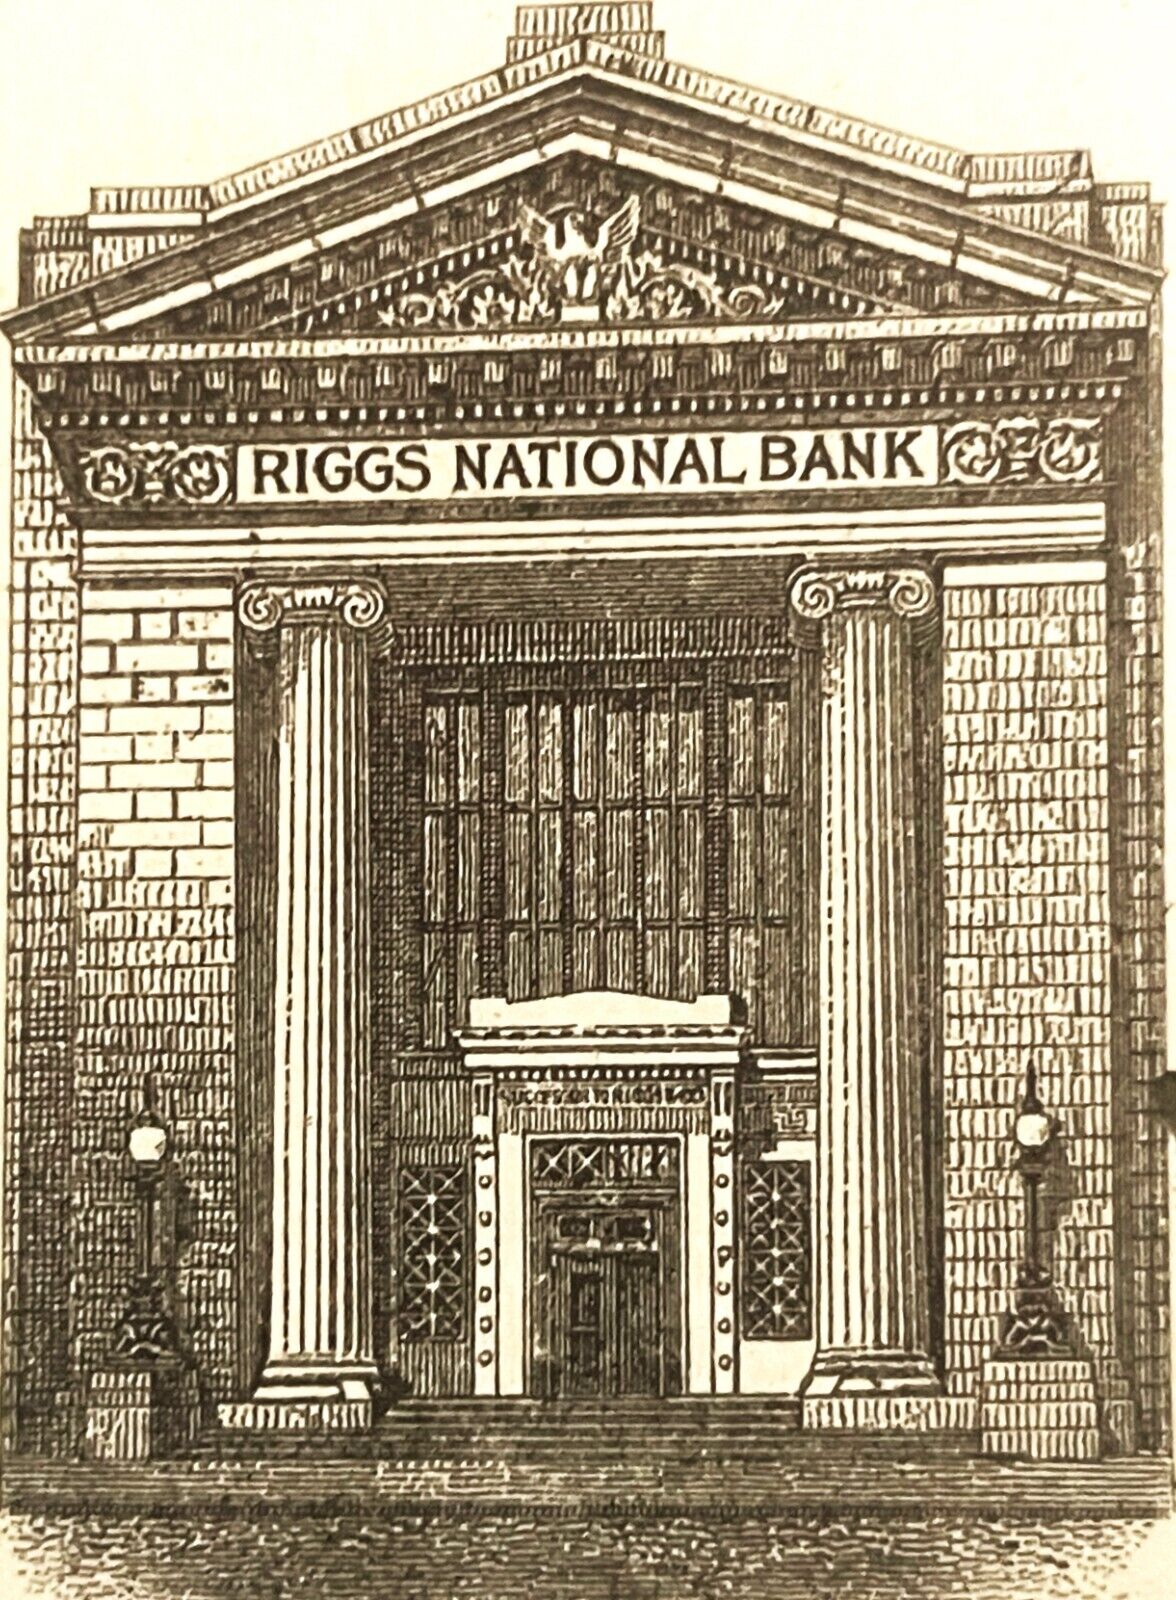 Antique 1900s - 1924 Riggs National Bank Check, Washington DC, Most Famous Bank